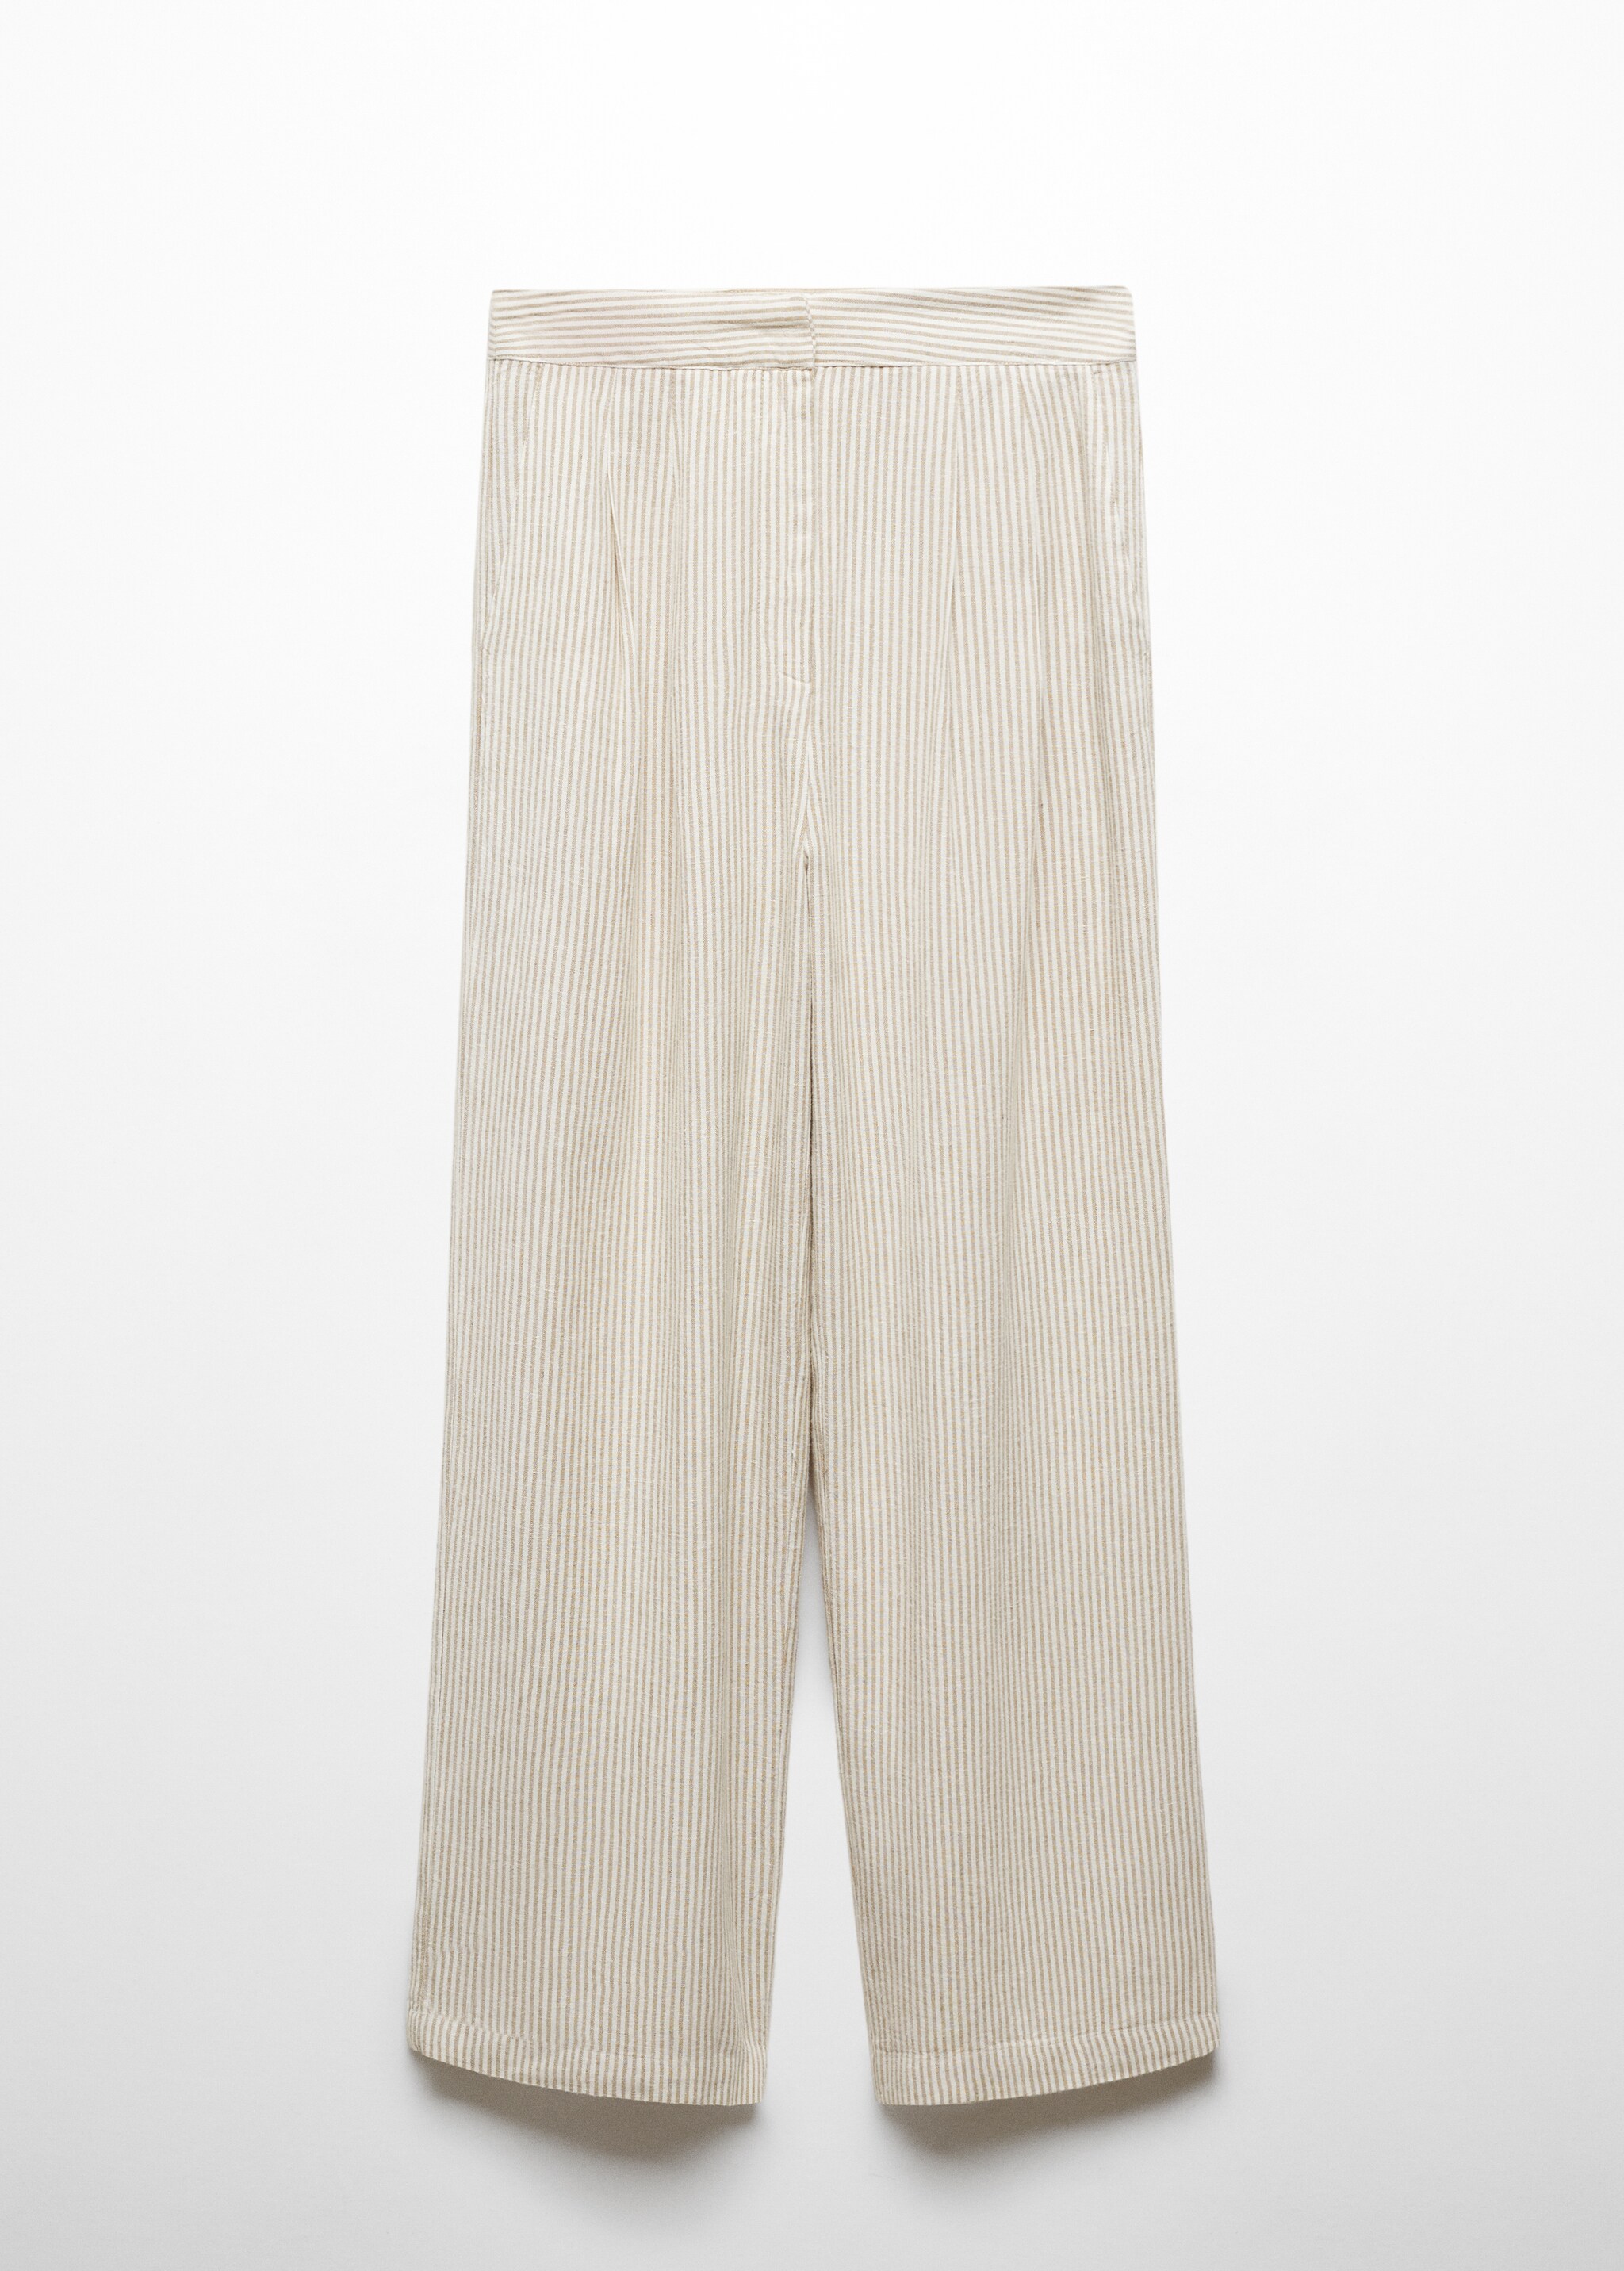 Striped linen suit trousers - Article without model